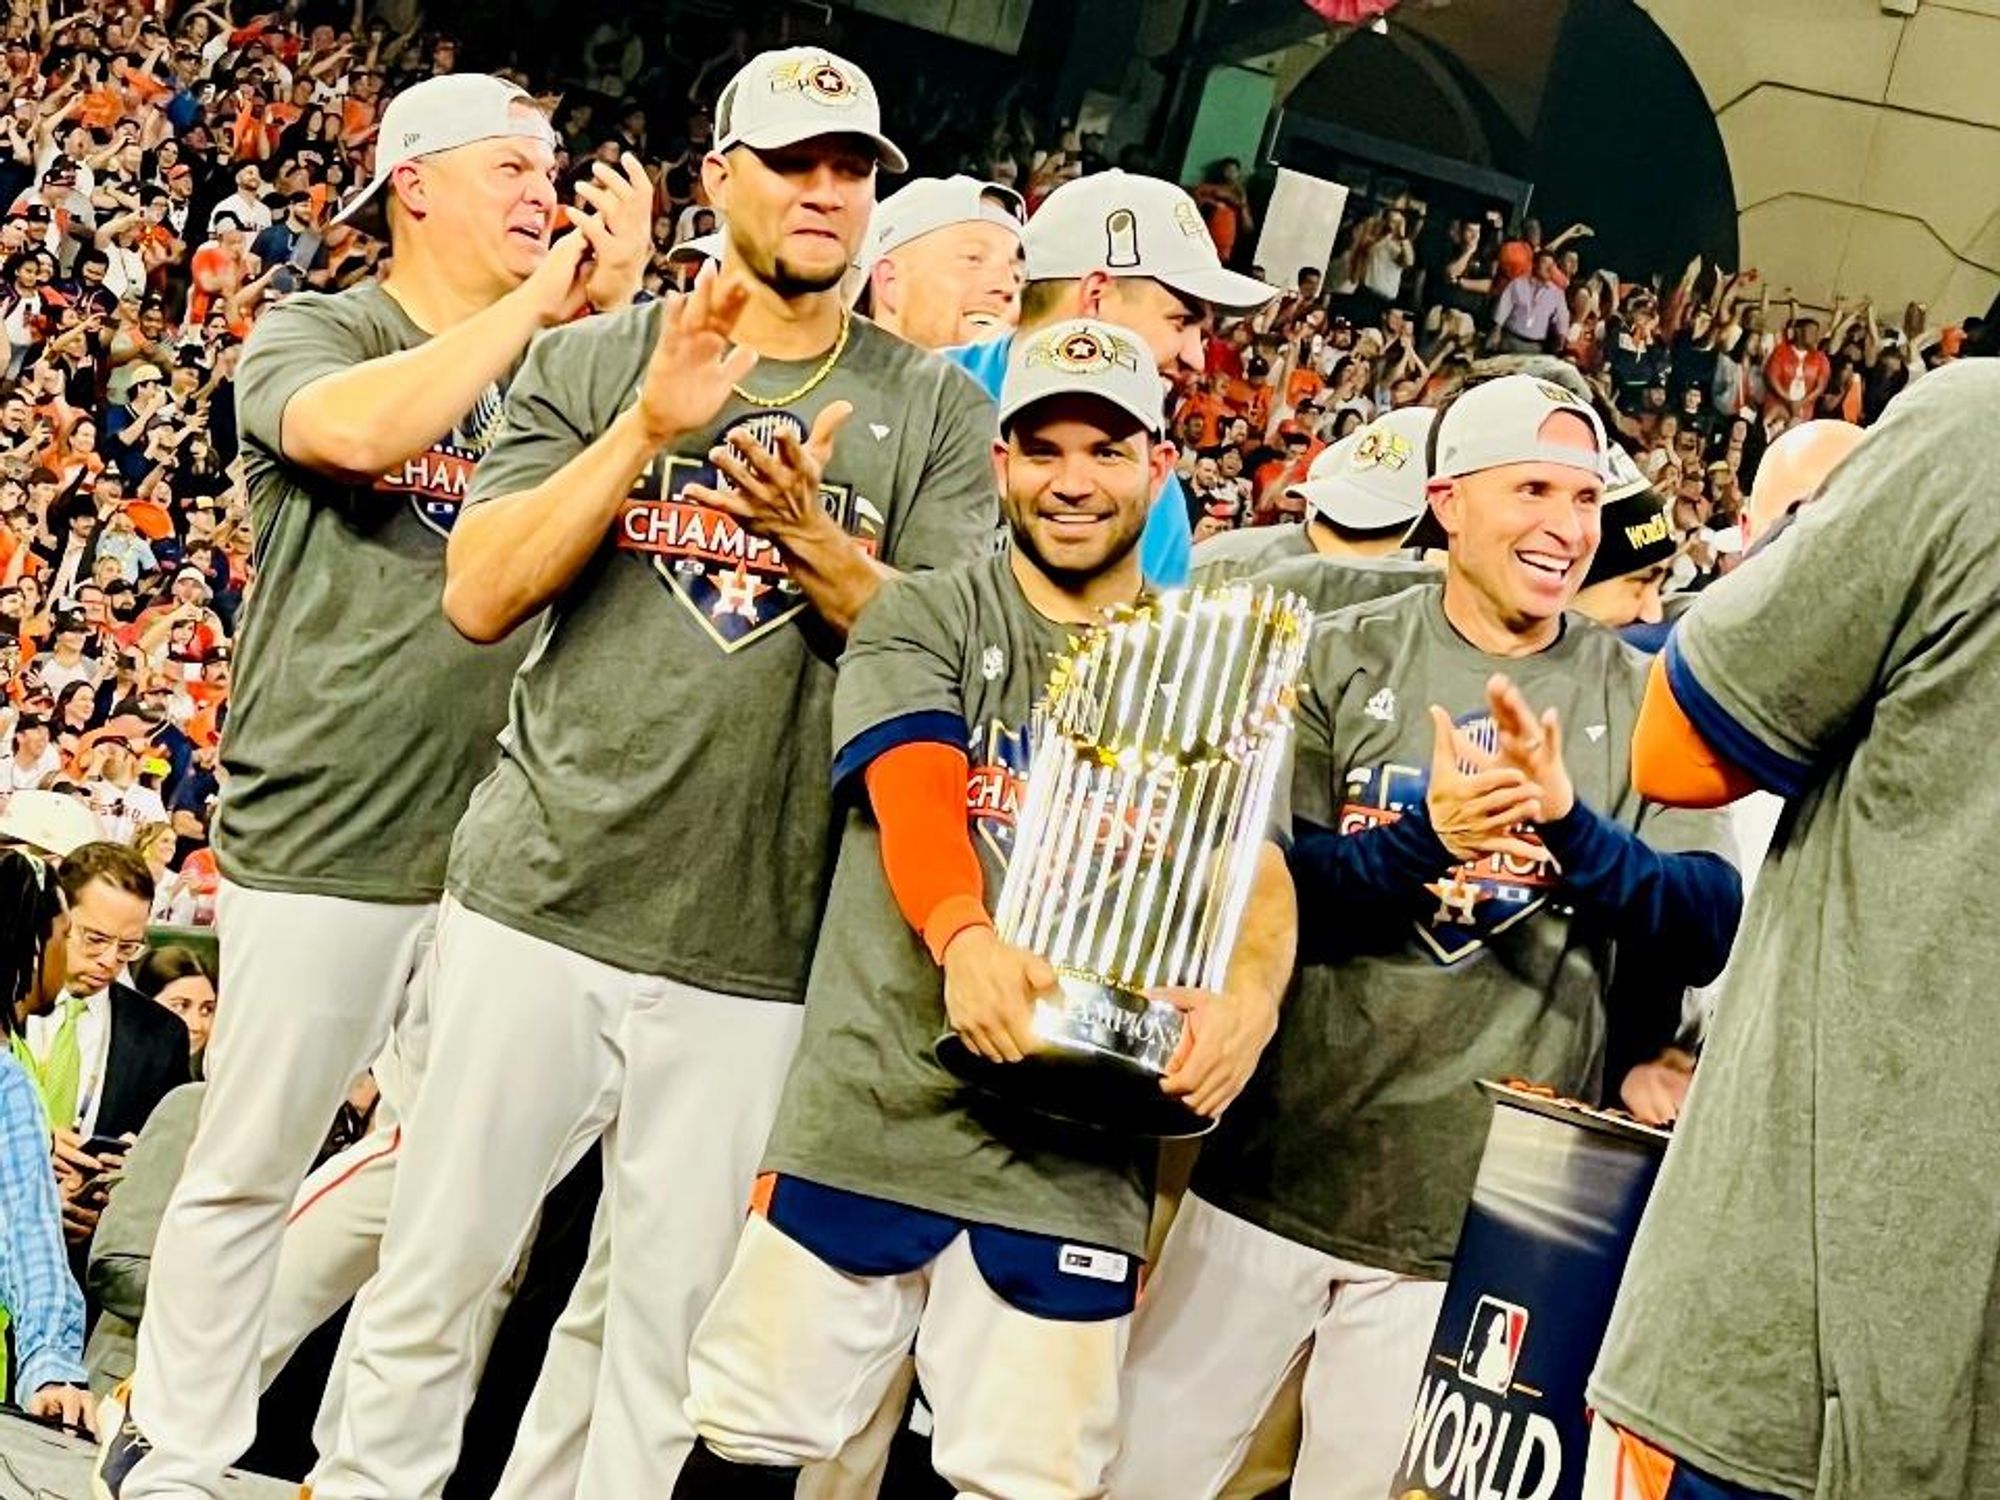 Here's what to know about the Houston Astros World Series